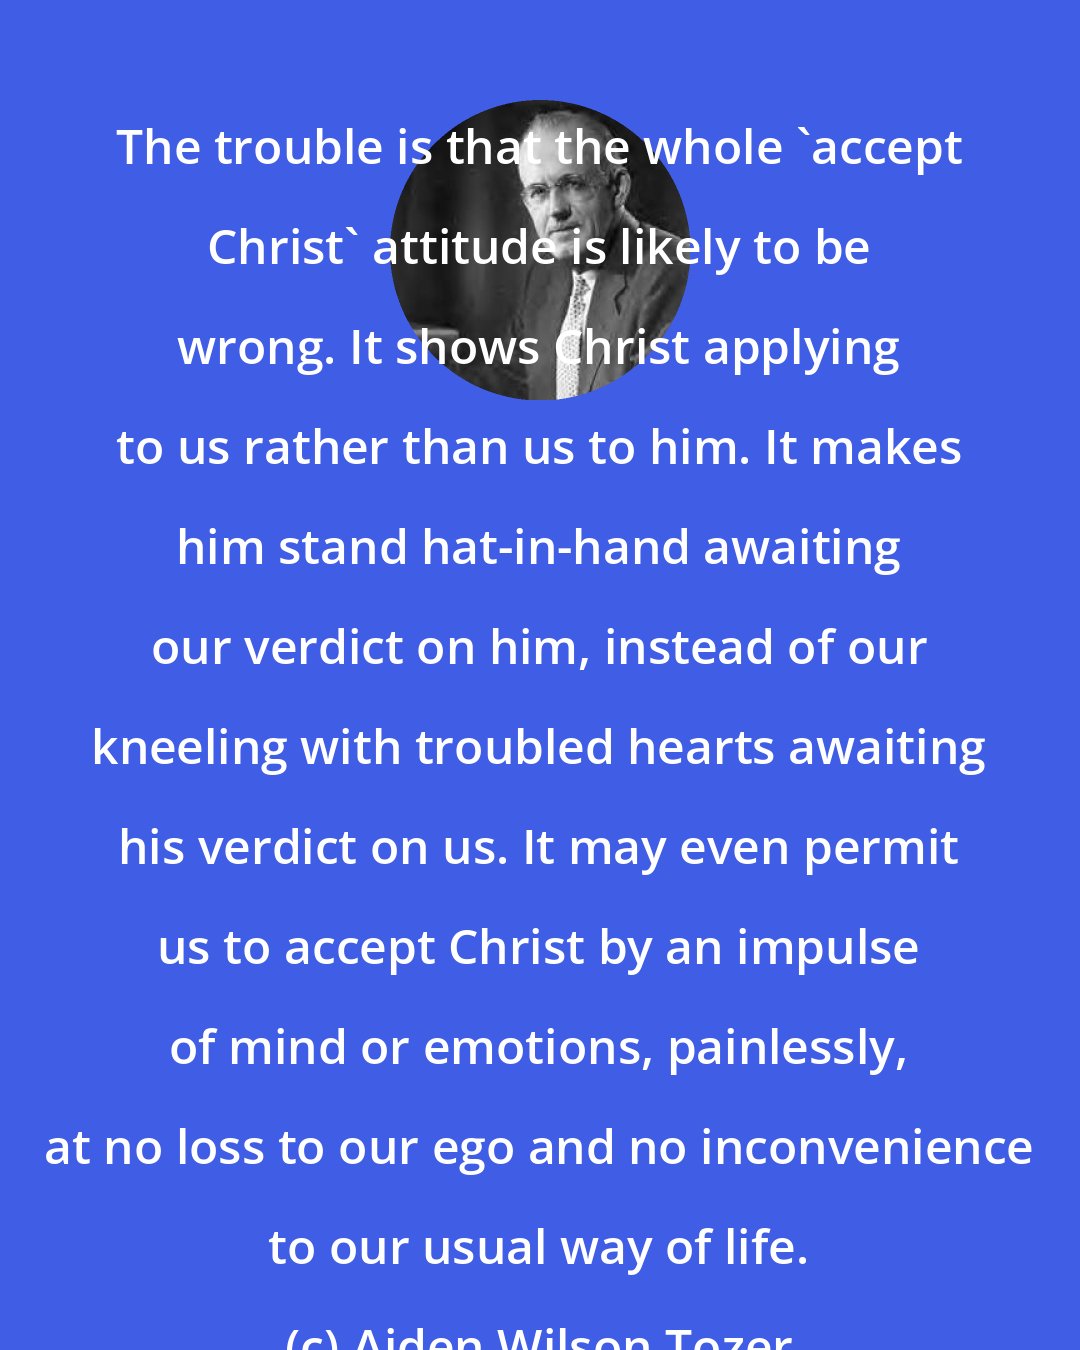 Aiden Wilson Tozer: The trouble is that the whole 'accept Christ' attitude is likely to be wrong. It shows Christ applying to us rather than us to him. It makes him stand hat-in-hand awaiting our verdict on him, instead of our kneeling with troubled hearts awaiting his verdict on us. It may even permit us to accept Christ by an impulse of mind or emotions, painlessly, at no loss to our ego and no inconvenience to our usual way of life.